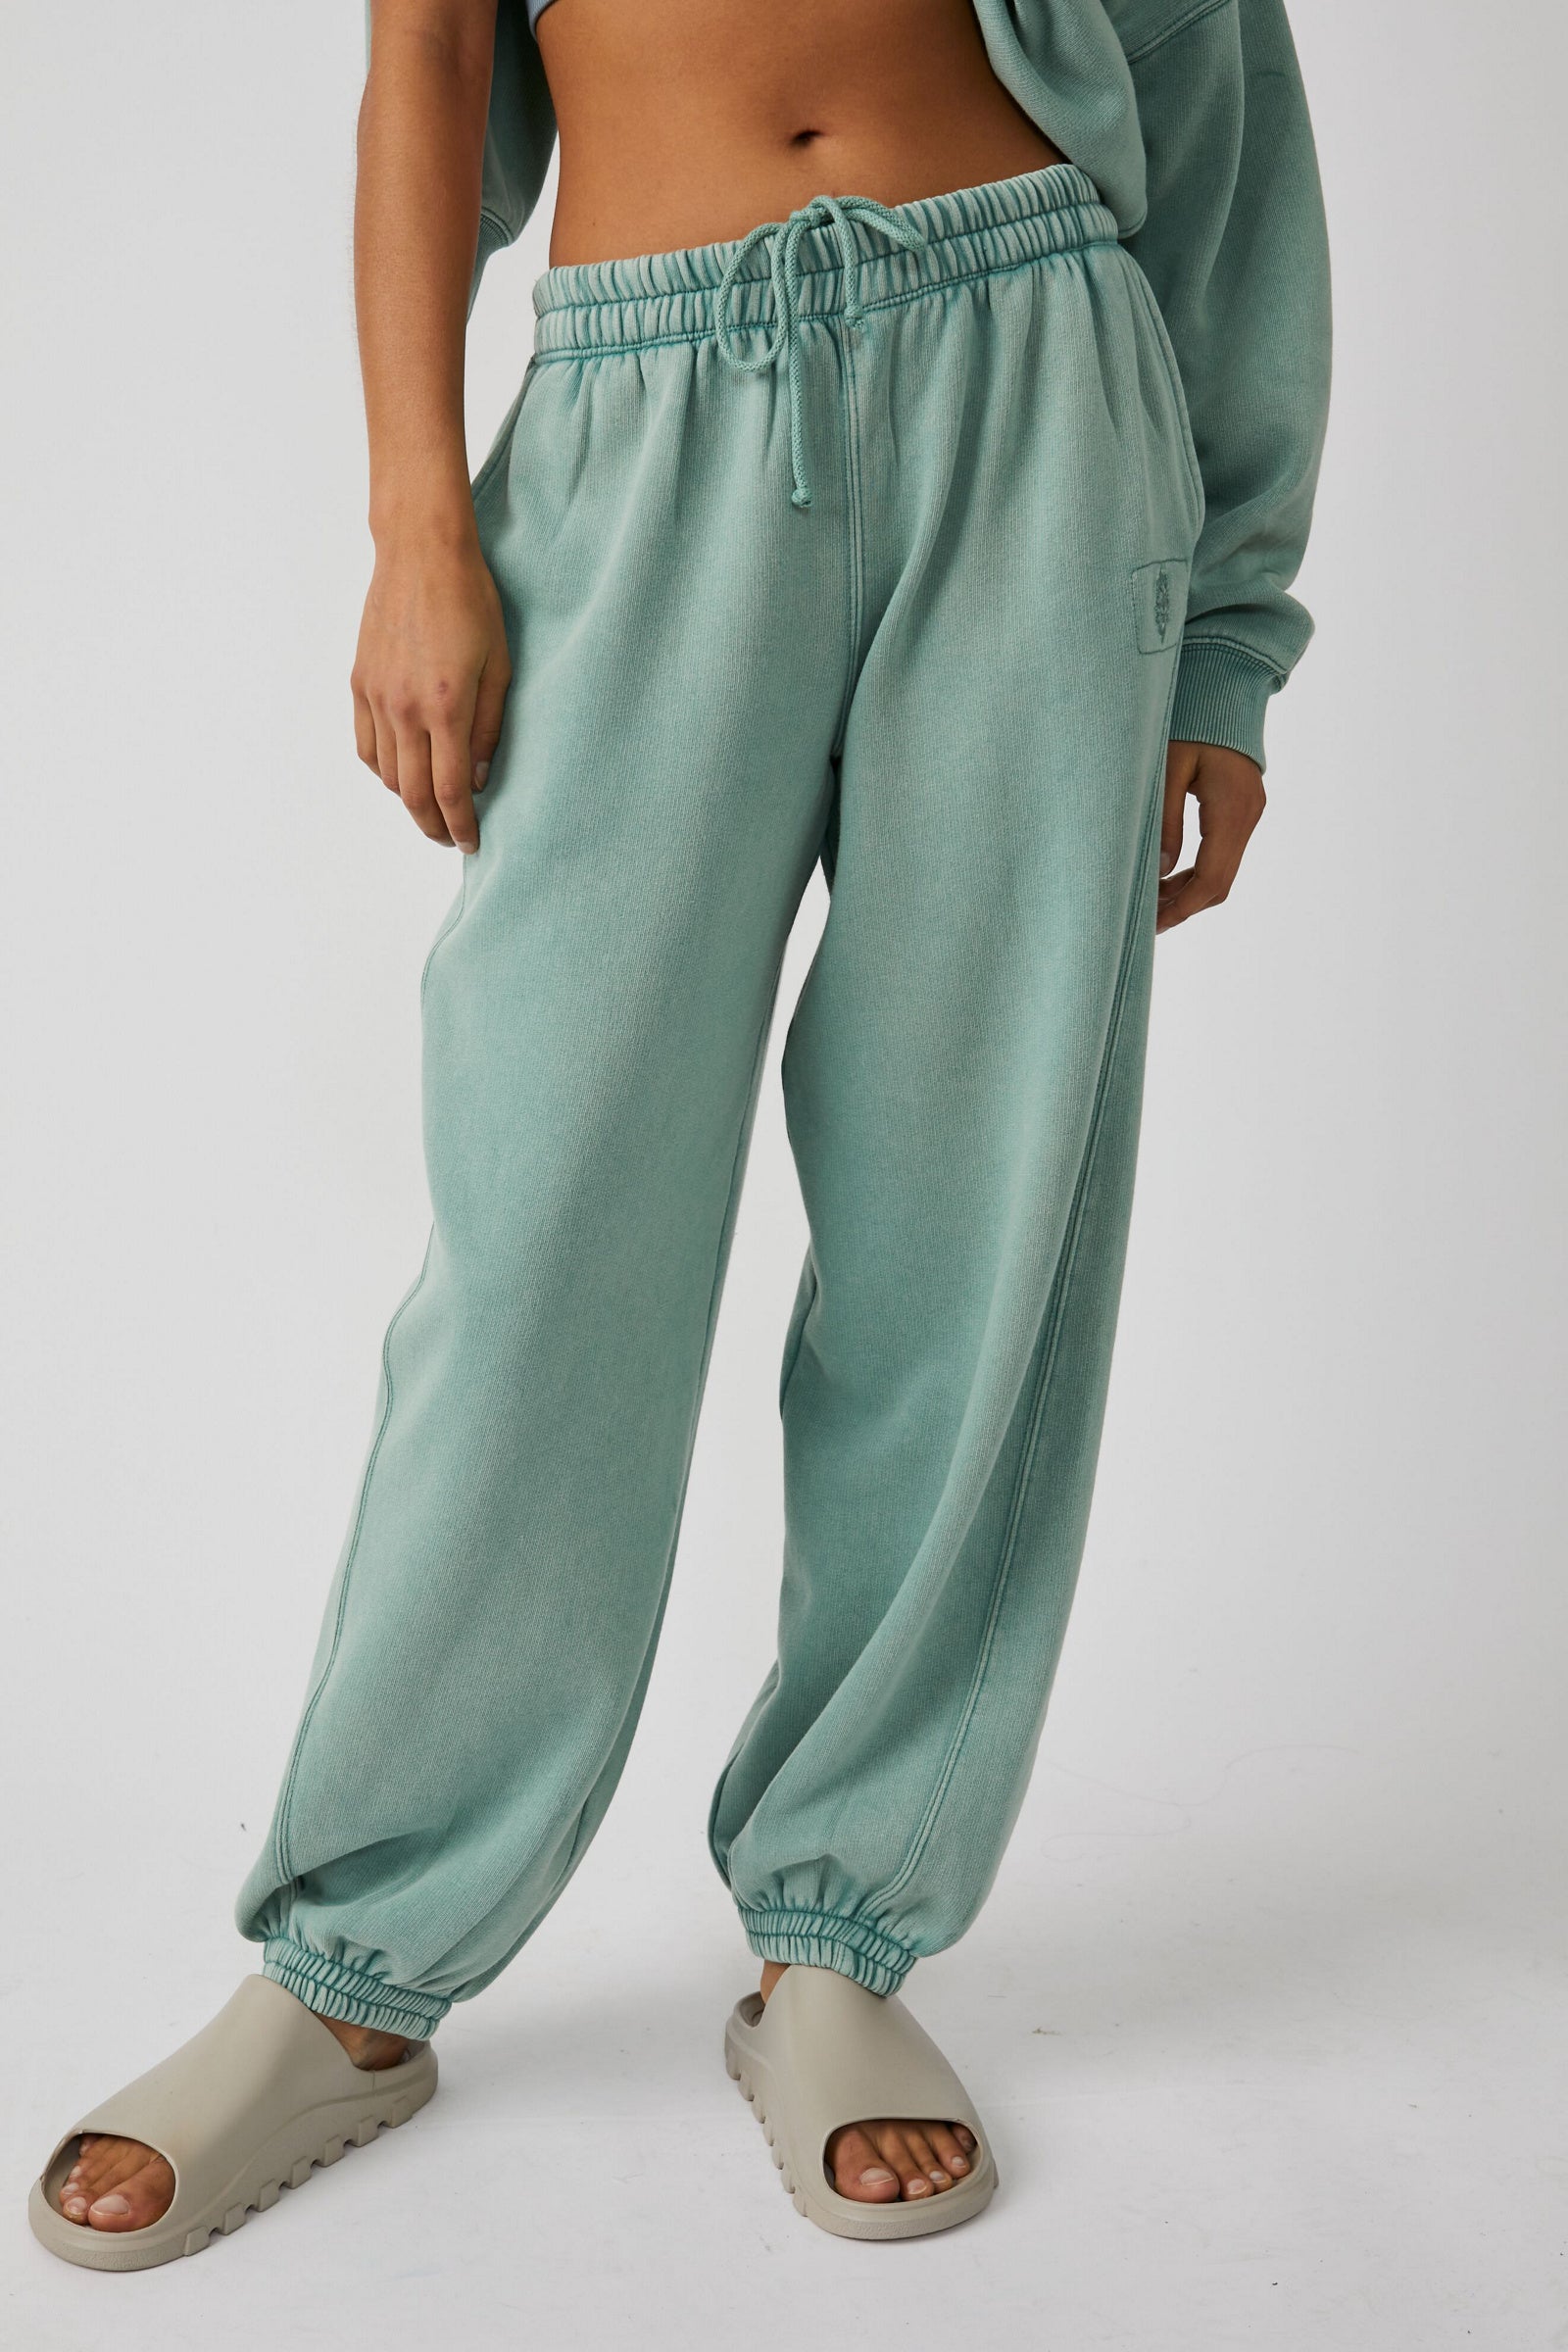 Free People All Star Pant